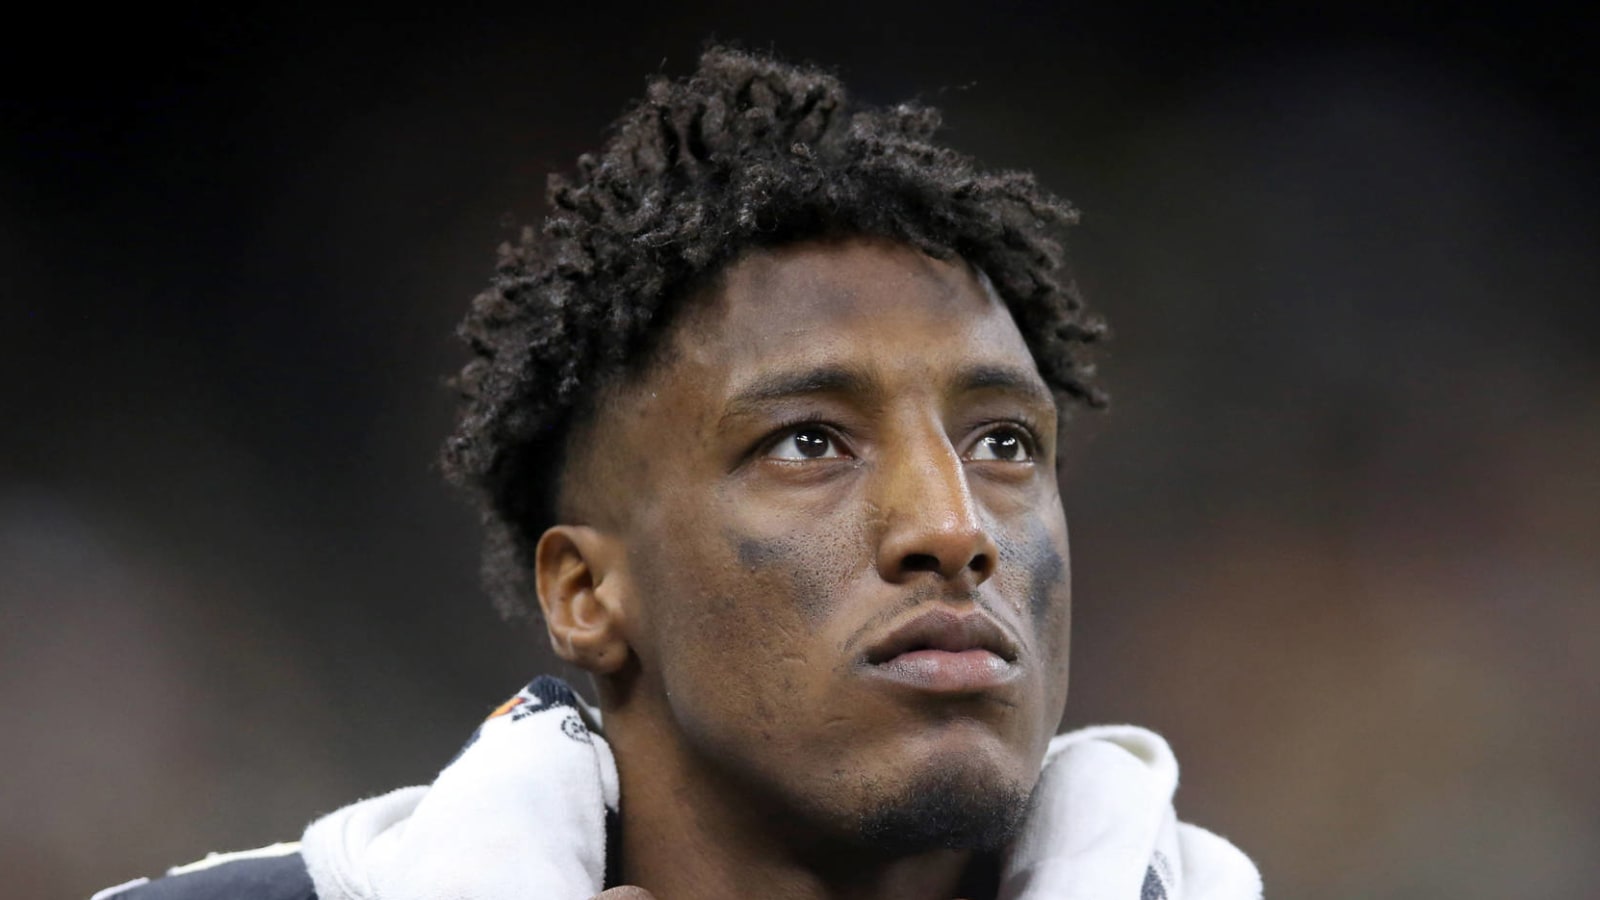 Saints All-Pro WR Michael Thomas out for Panthers game